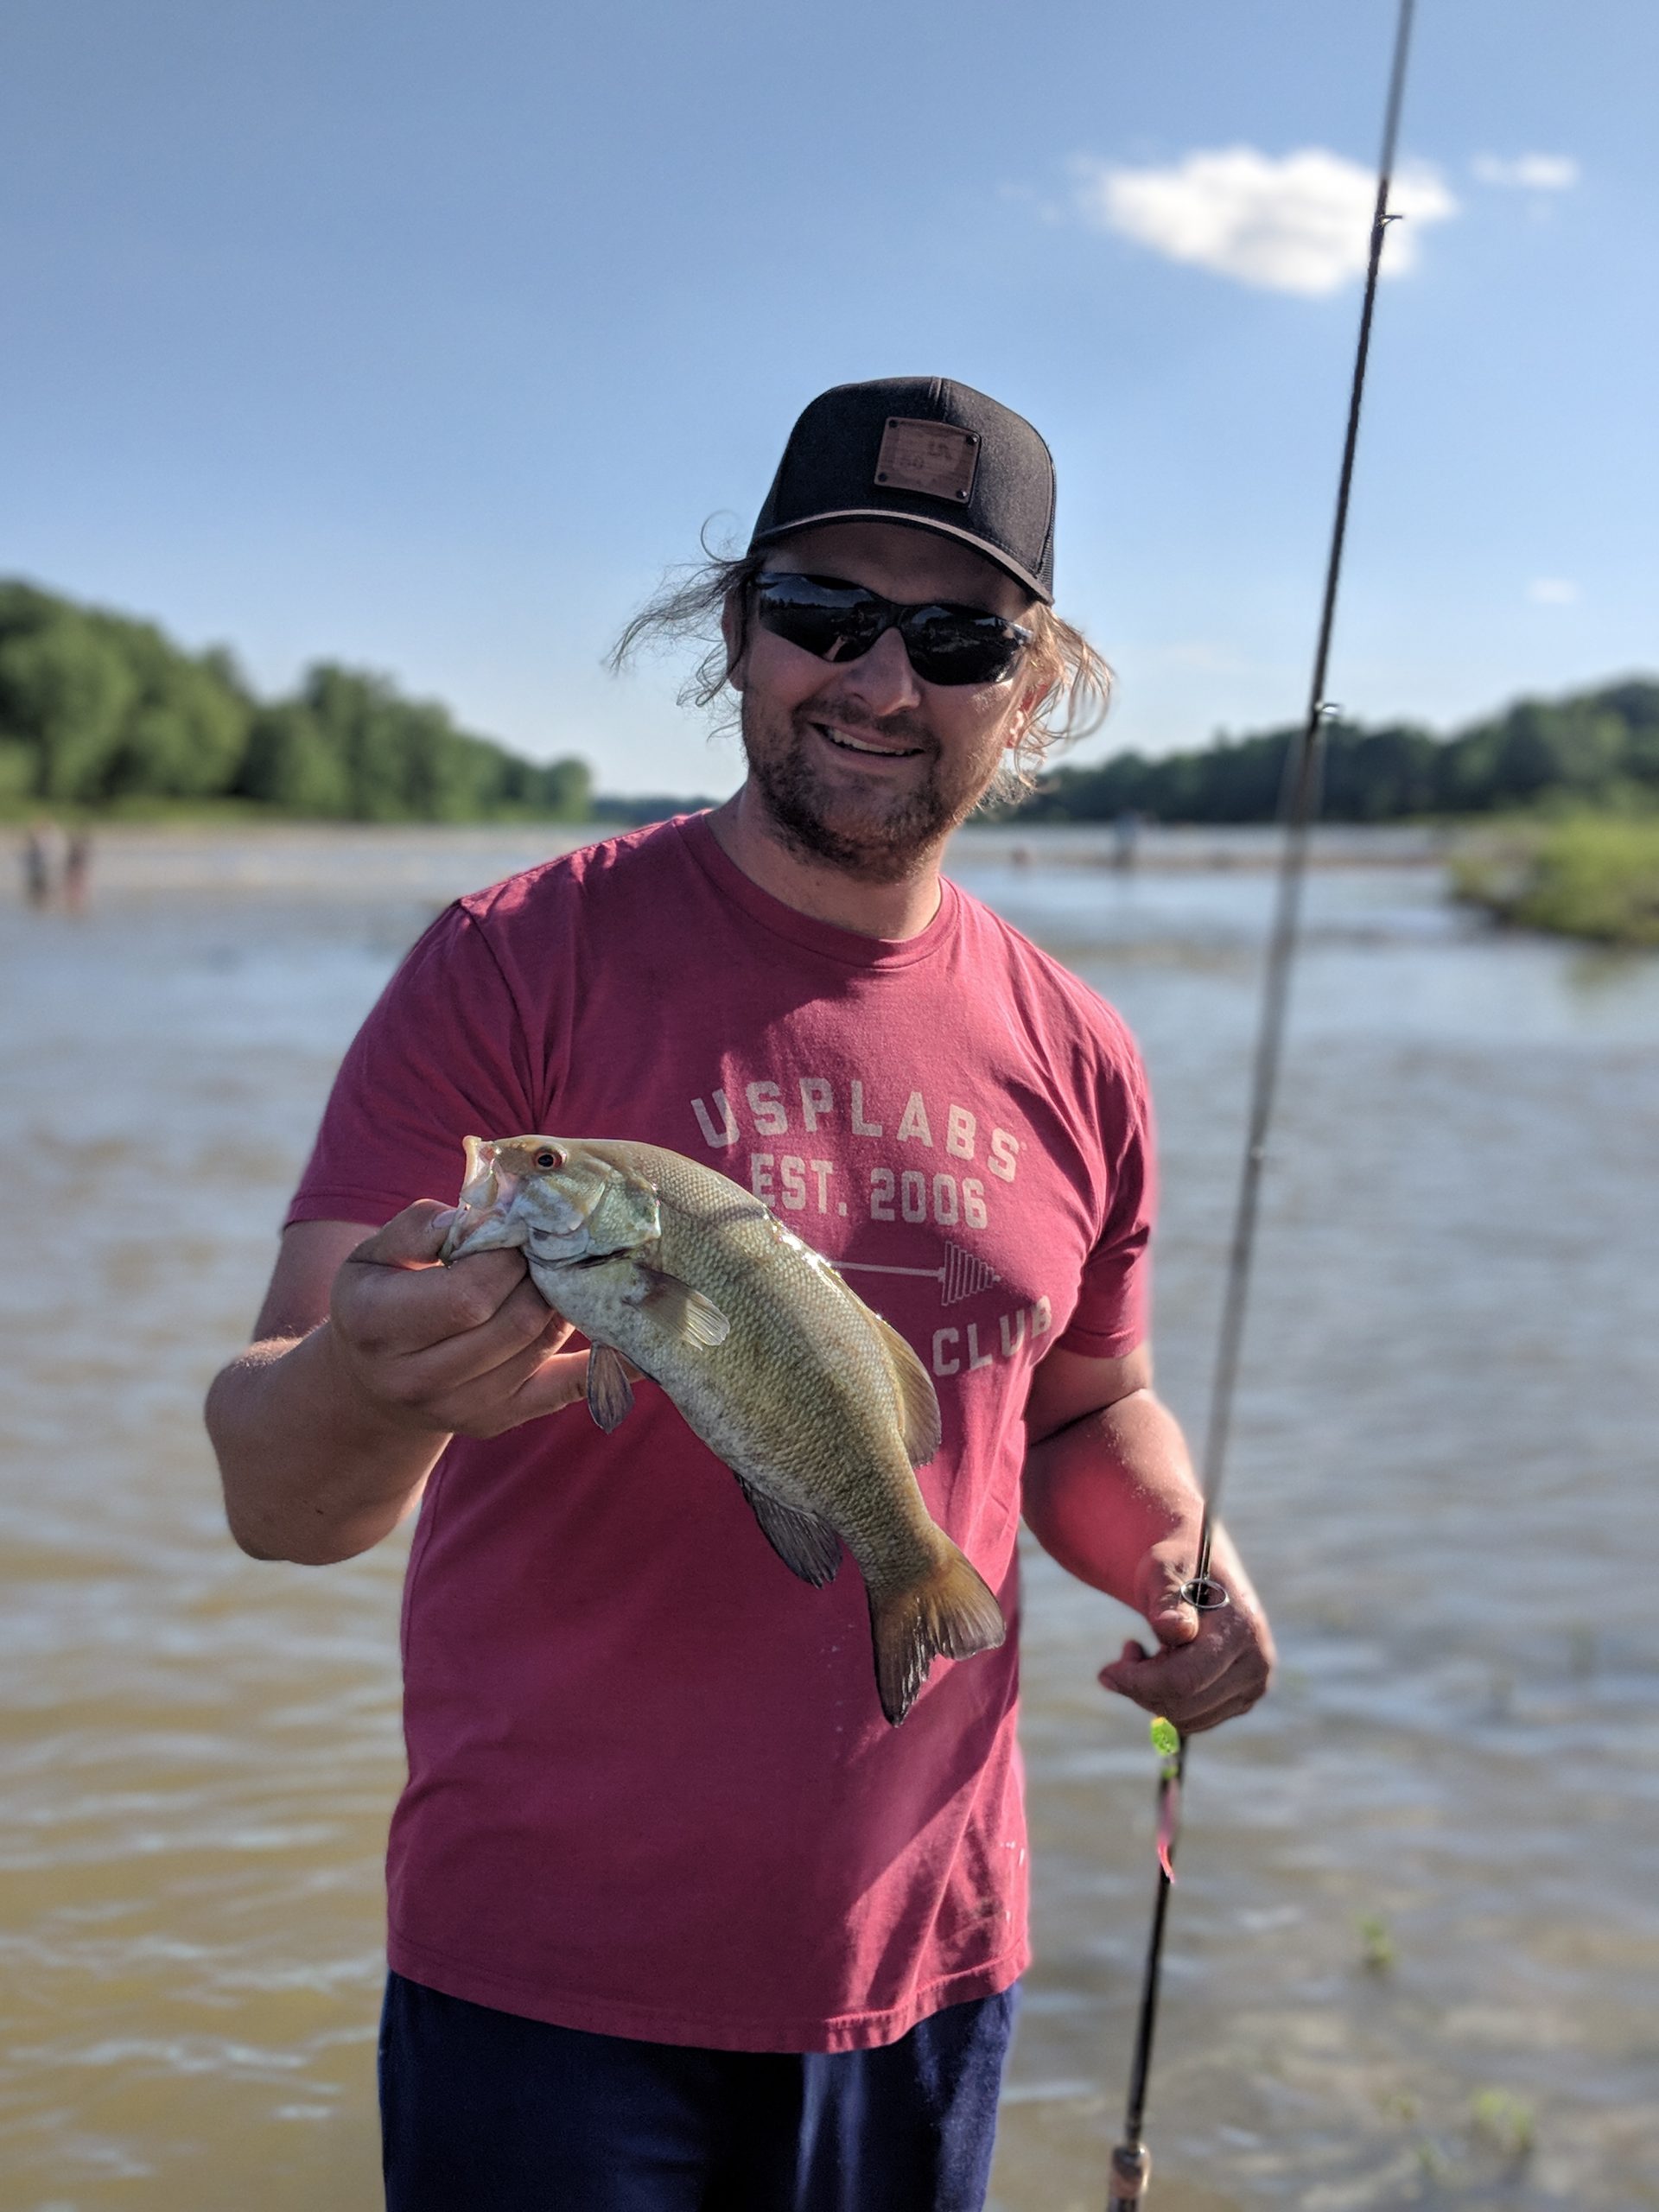 Maumee river Report- 8 June 20- Its all good on the river.